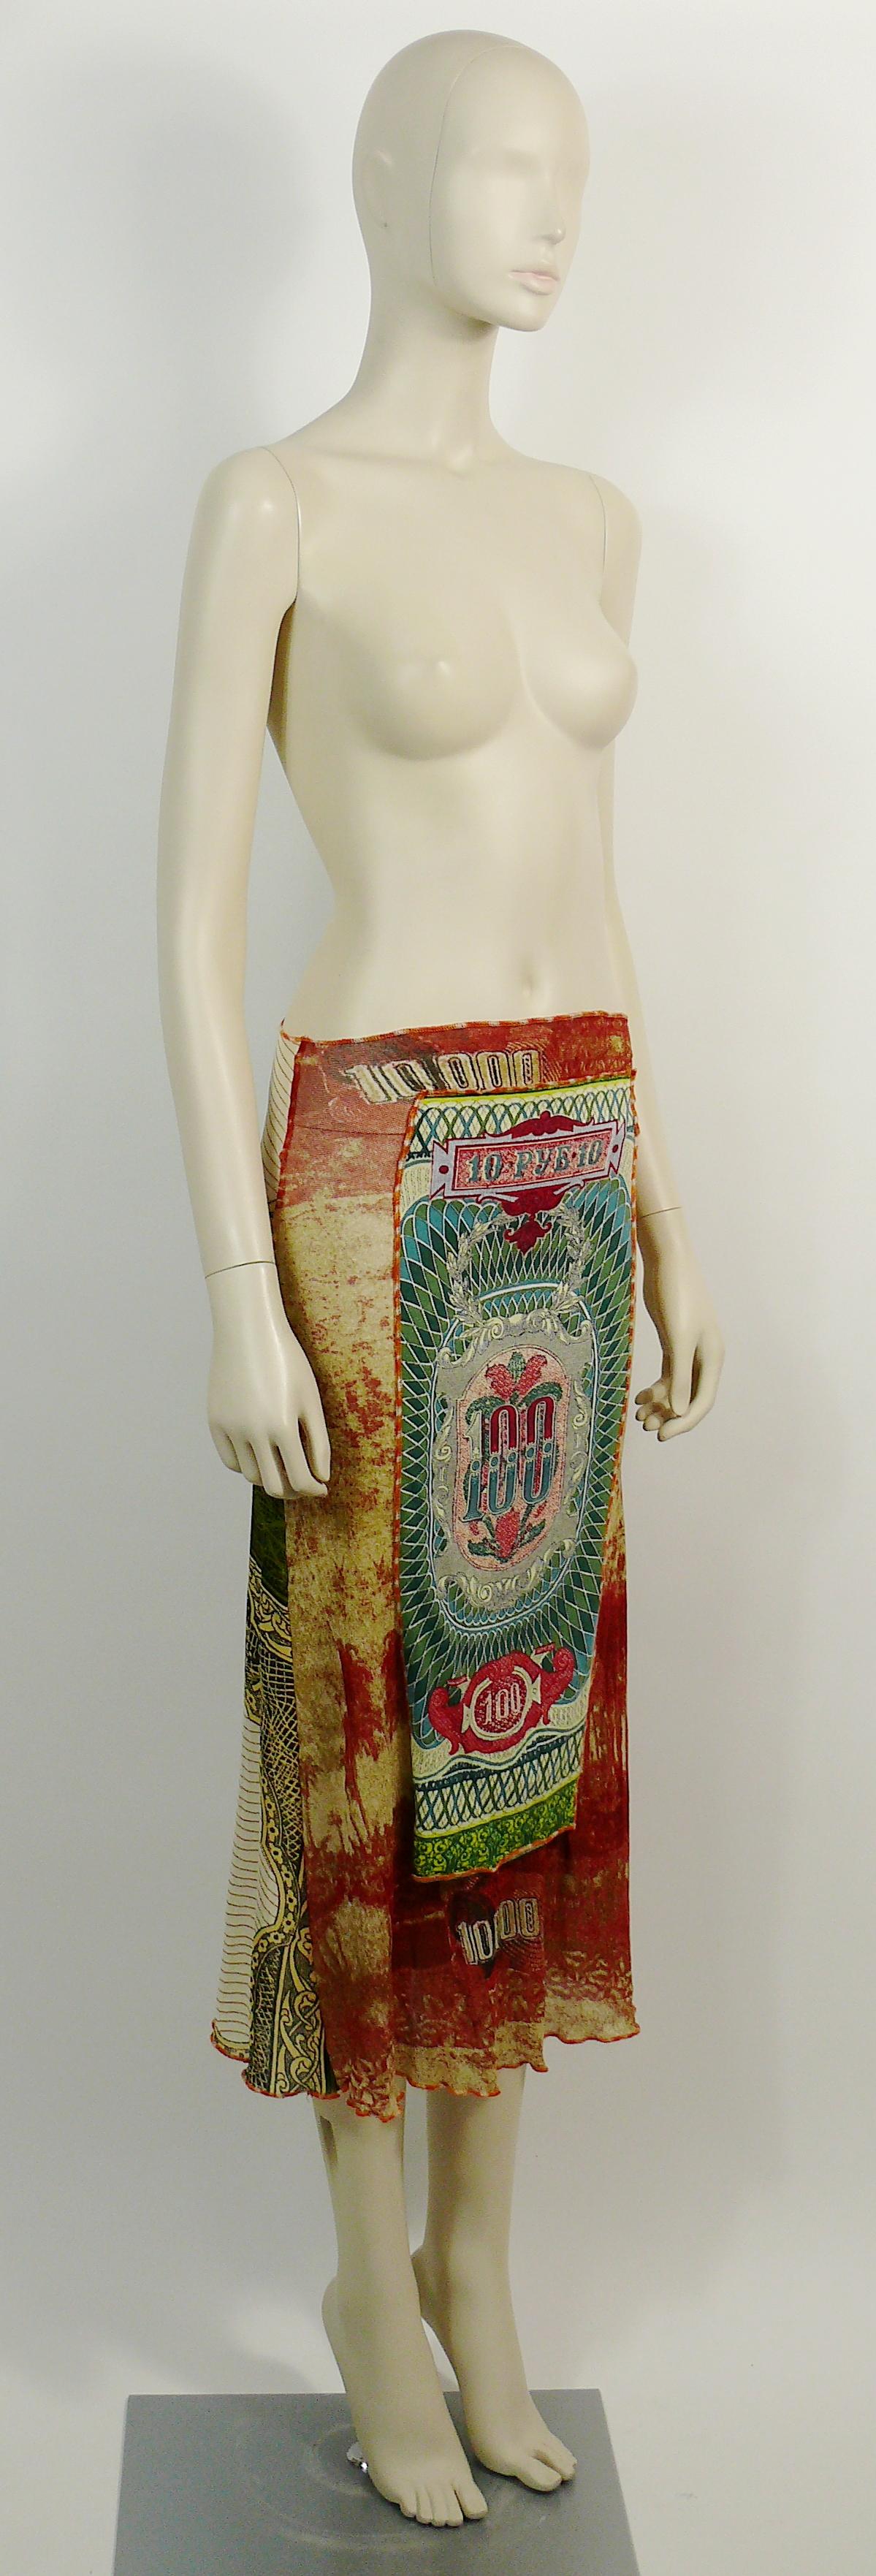 JEAN PAUL GAULTIER vintage skirt featuring a Russian rouble banknote print.

This skirt is made of sheer FUZZI nylon mesh with cotton panels at front and back.

Label reads JEAN PAUL GAULTIER Maille.
Made in Italy.

Size label reads : S.
Please